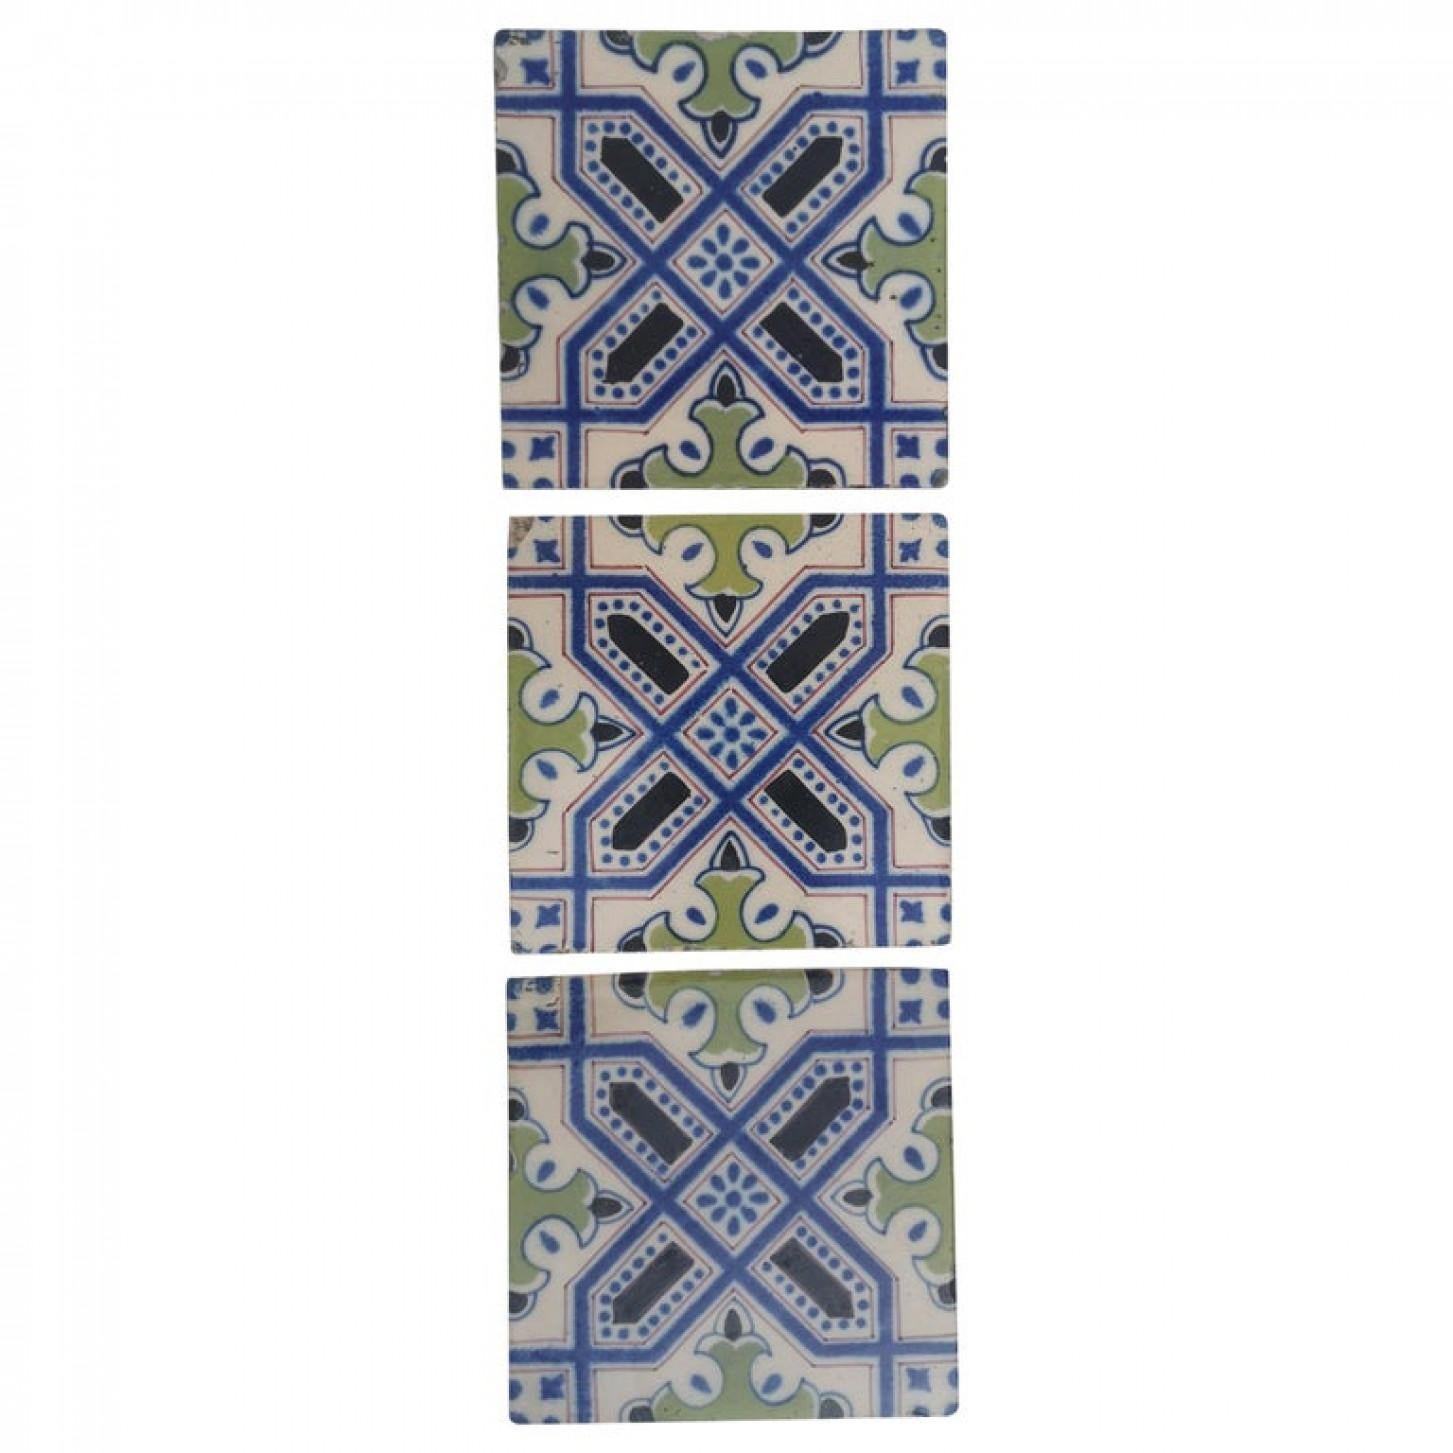 This is a amazing and unique set of 35 antique handmade ceramic tiles. Manufactured in Holland, circa 1920s. Stylized design. These tiles would be charming displayed on easels, framed or incorporated into a custom tile design.

These tiles come from